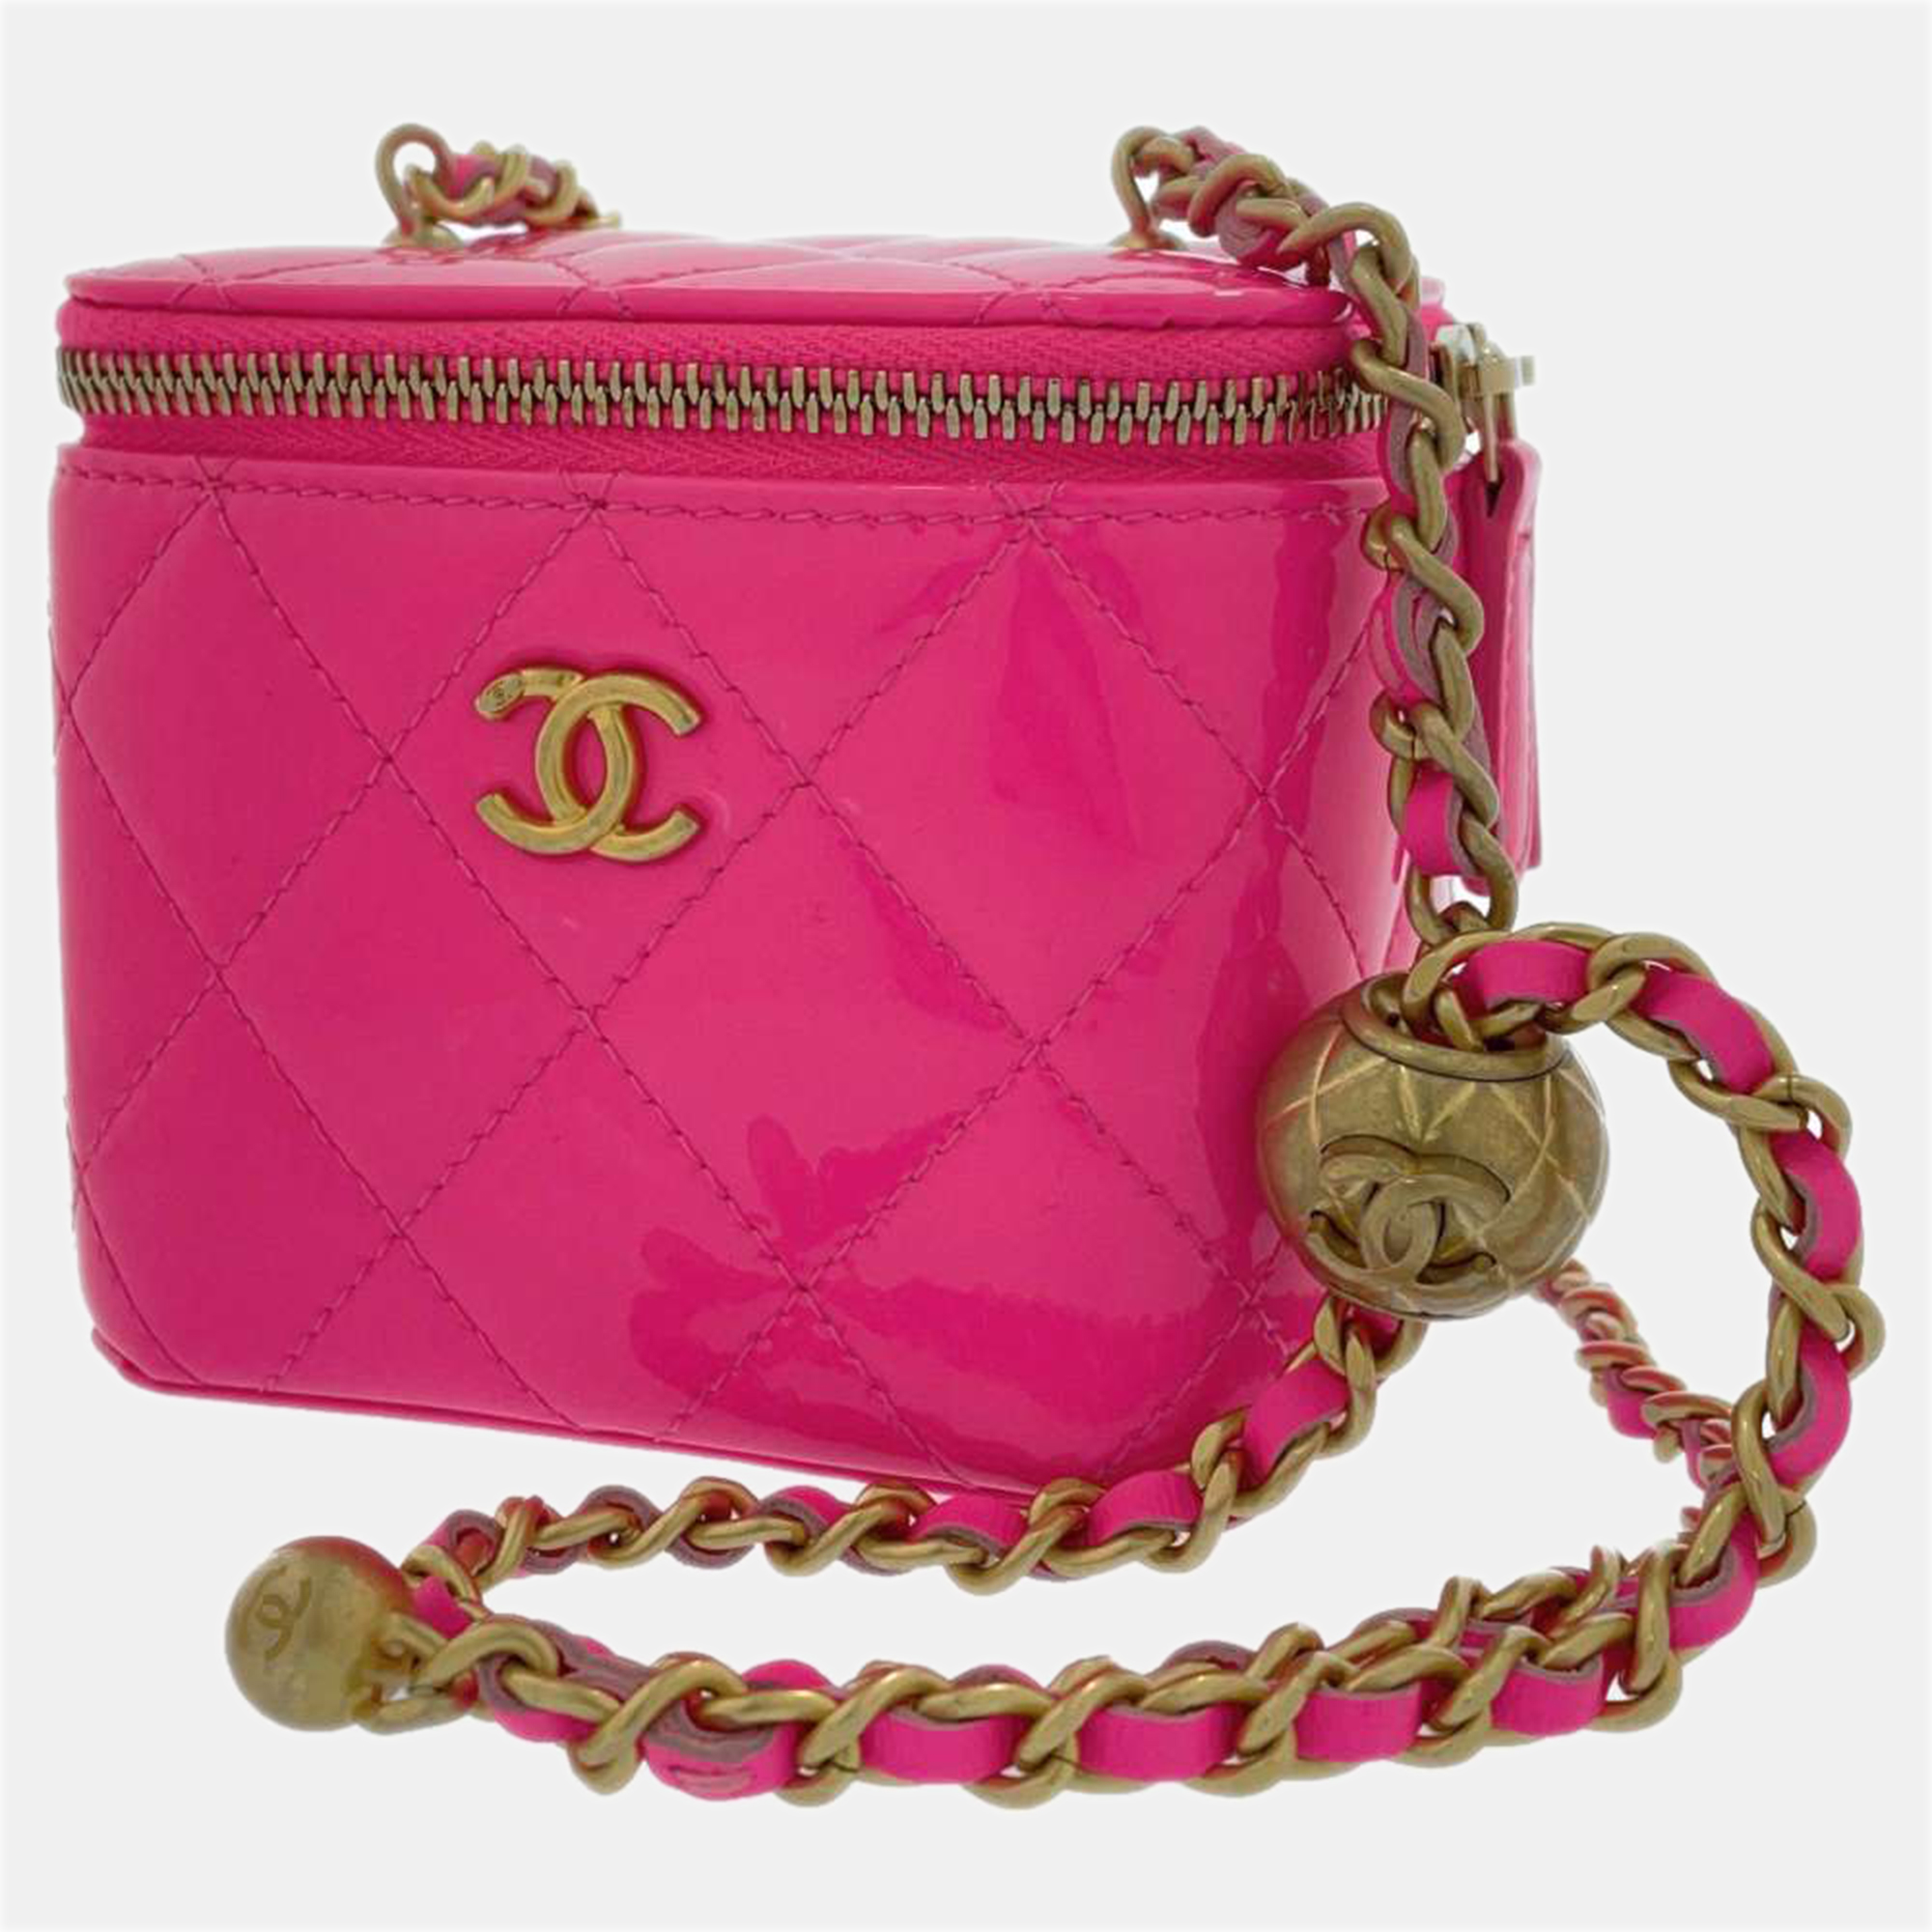 Chanel Pink Patent Leather Vanity Bag